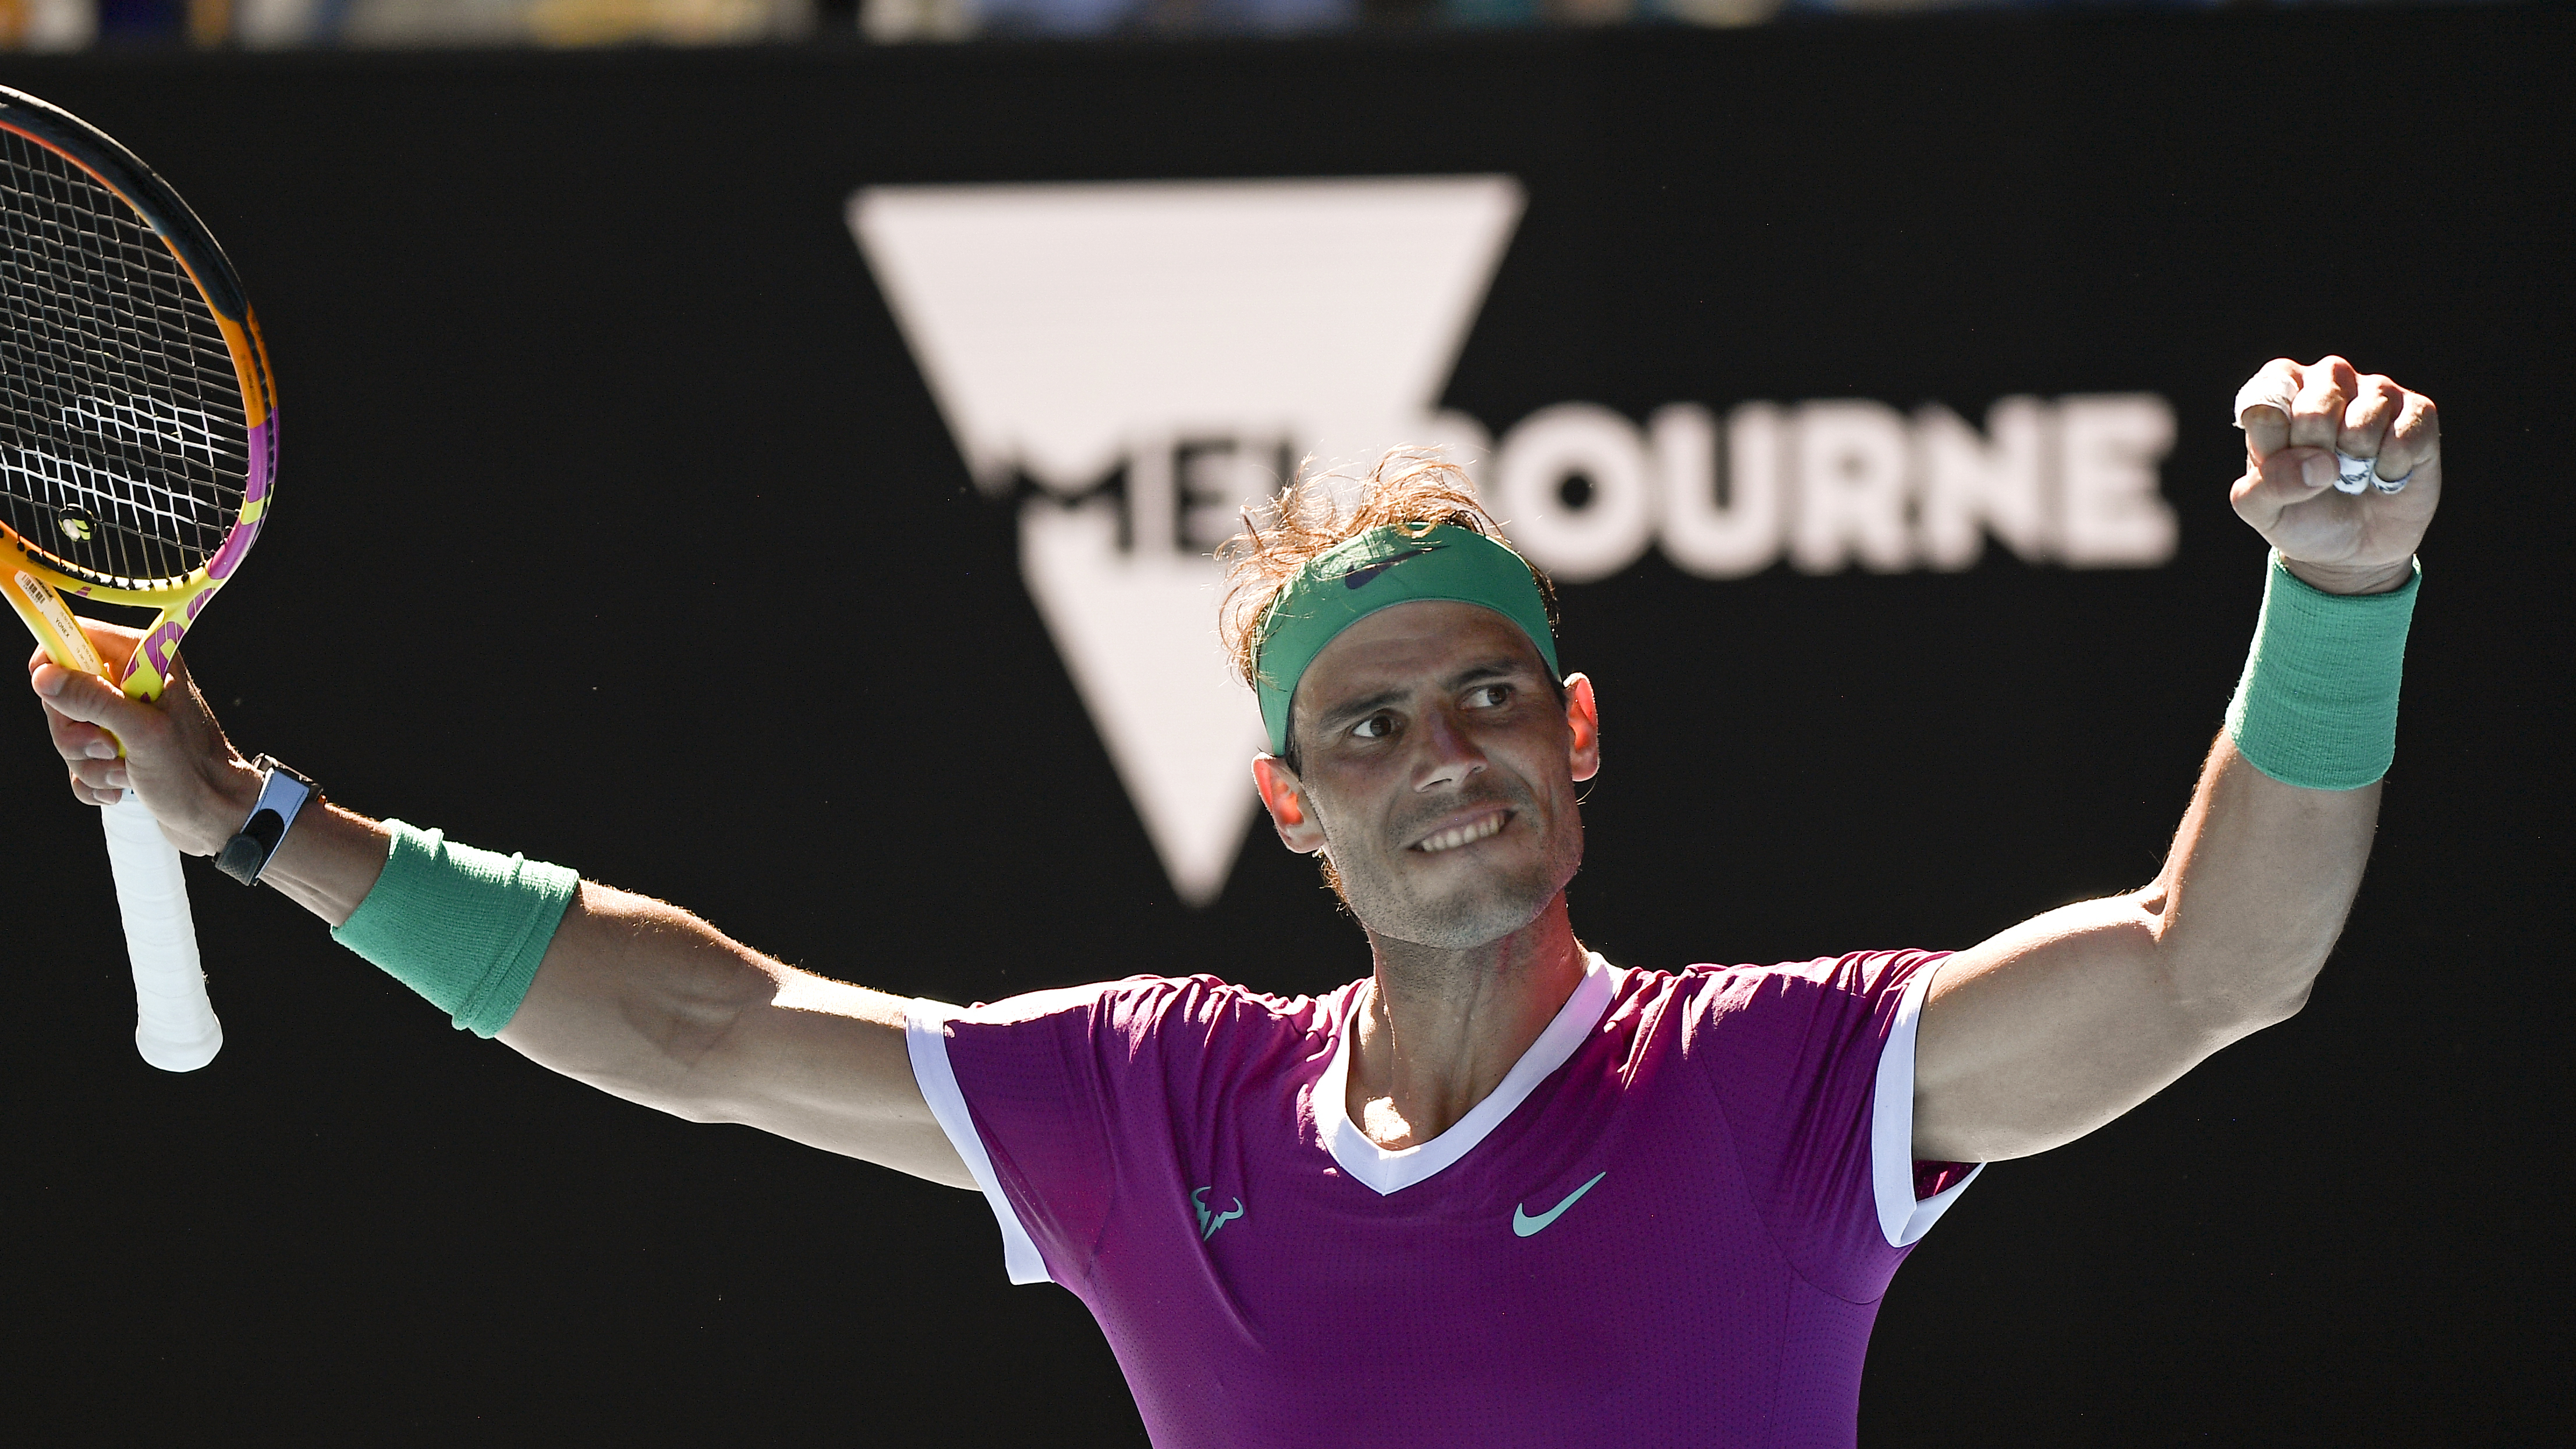 Australian Open Semifinals schedule TV channel, FREE live stream, how to watch Rafael Nadal, Ash Barty